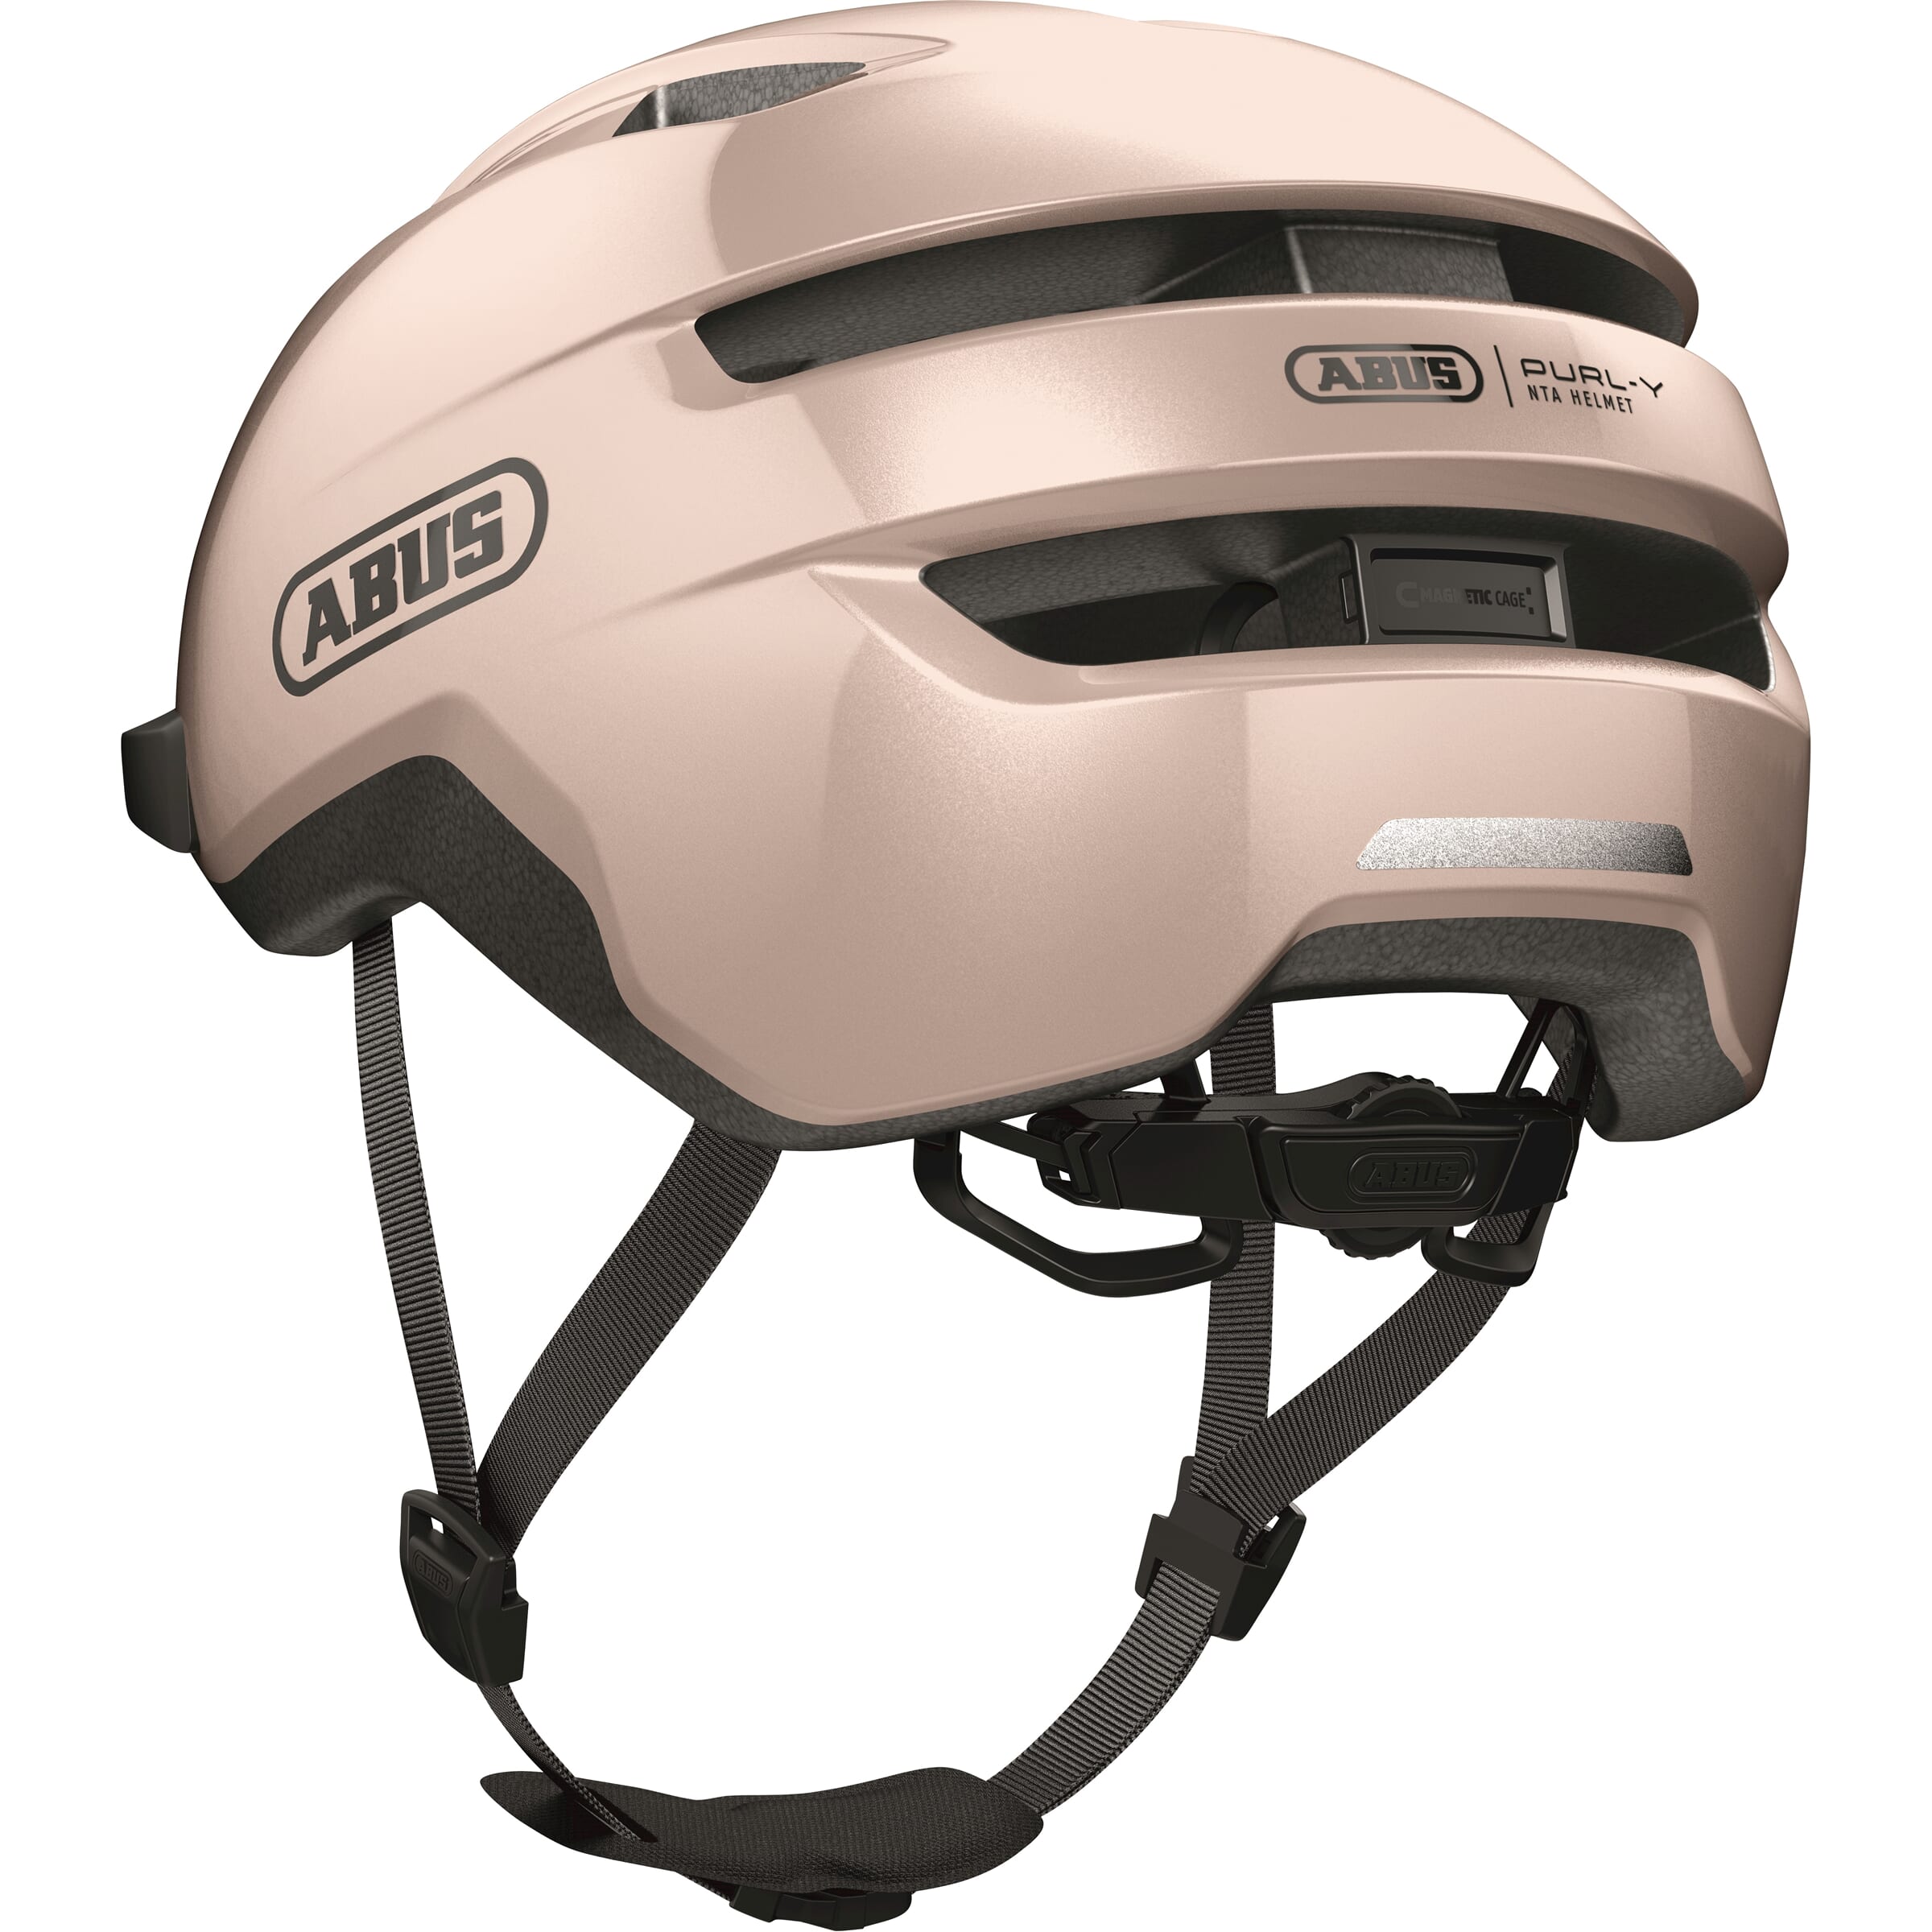 Kask rowerowy Abus Purl-Y Champagne Gold 